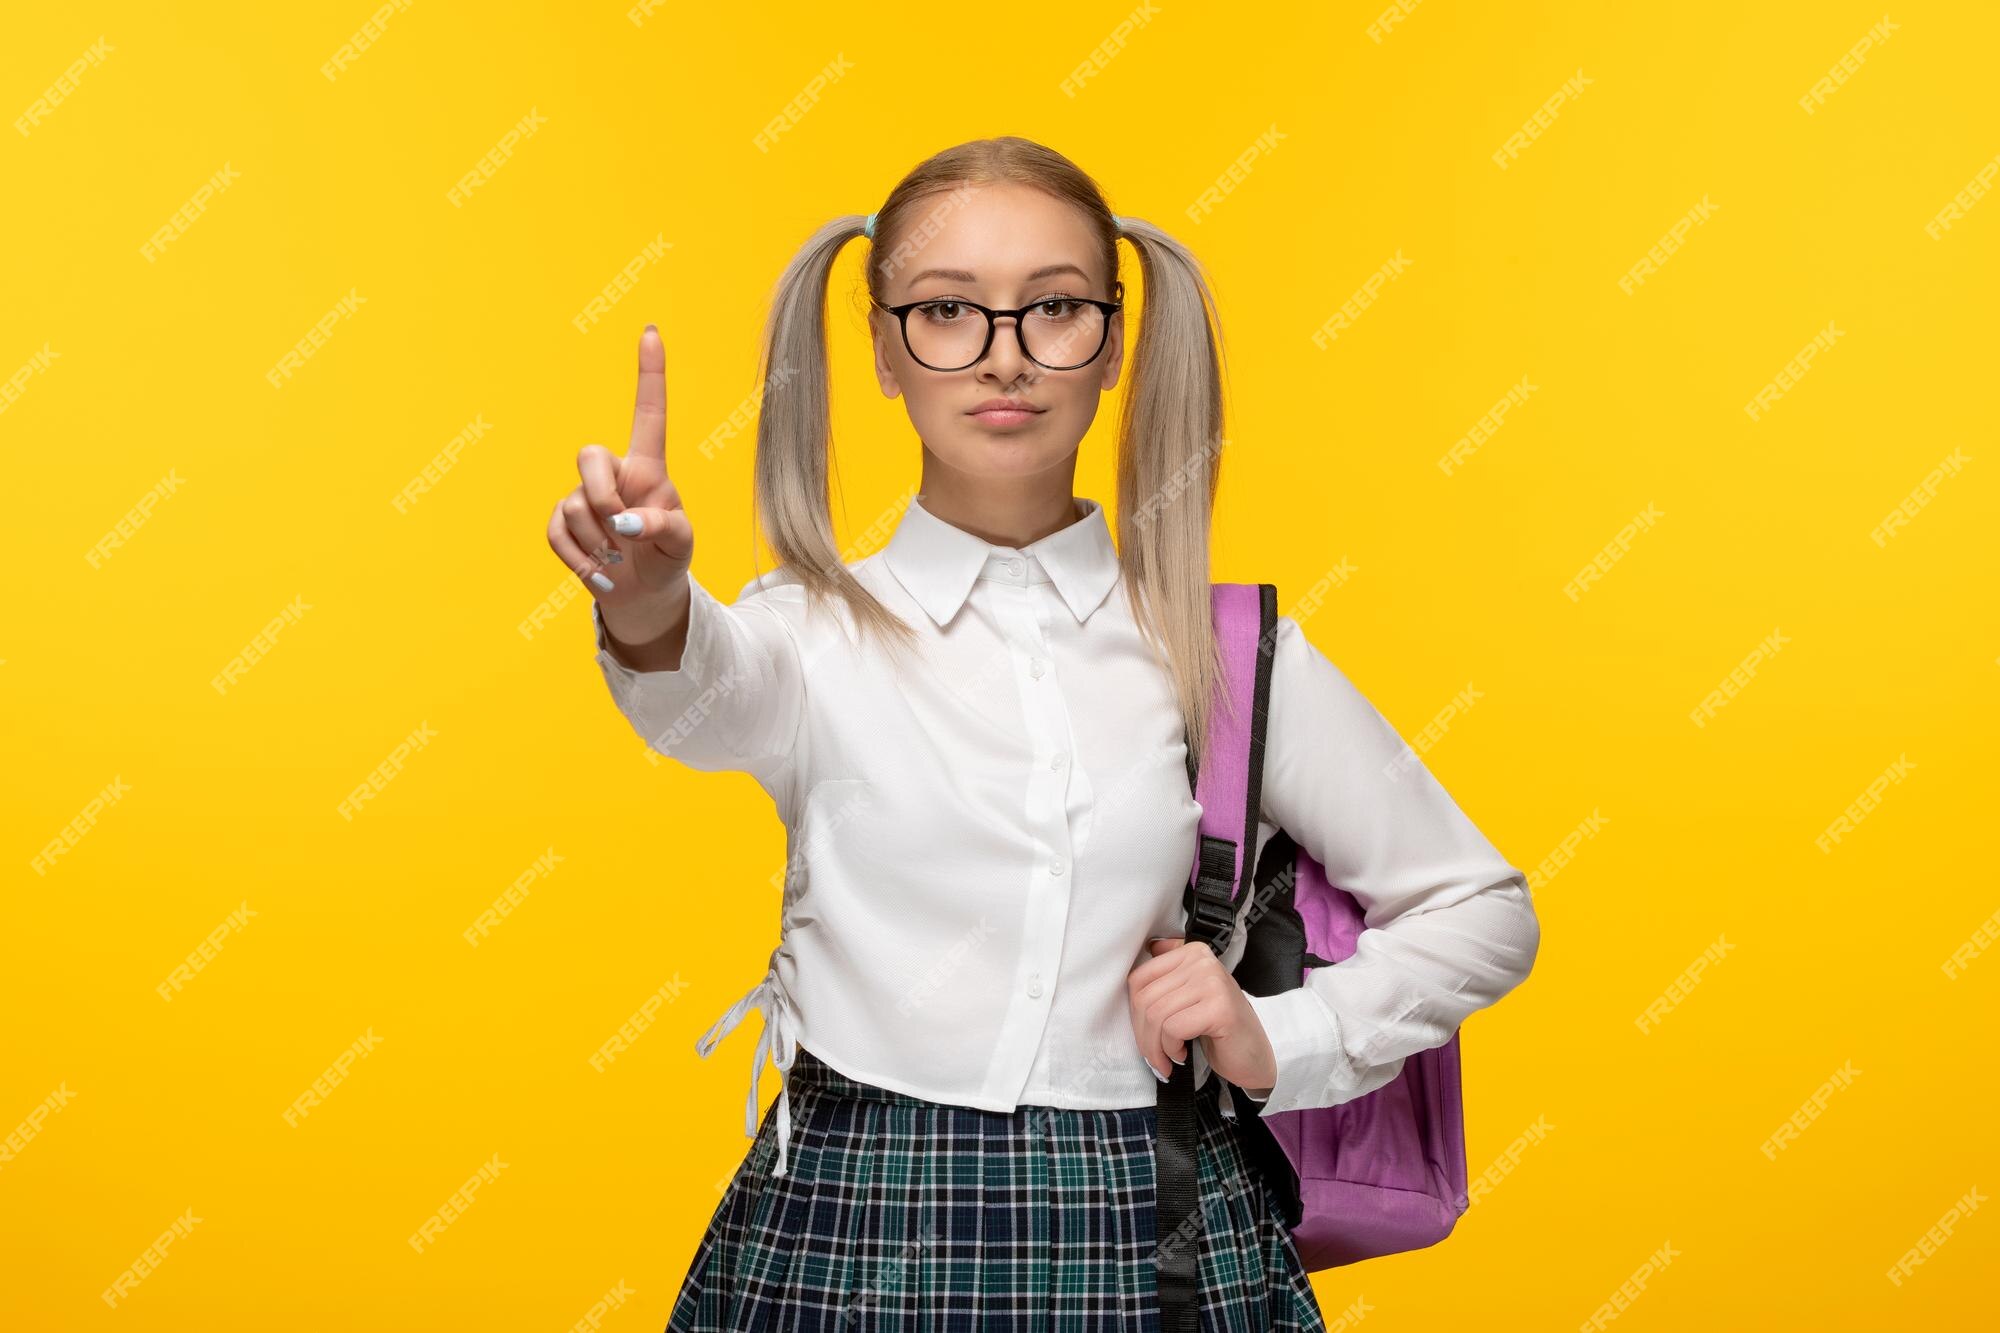 Page 2 | Sexy school girl Images | Free Vectors, Stock Photos & PSD